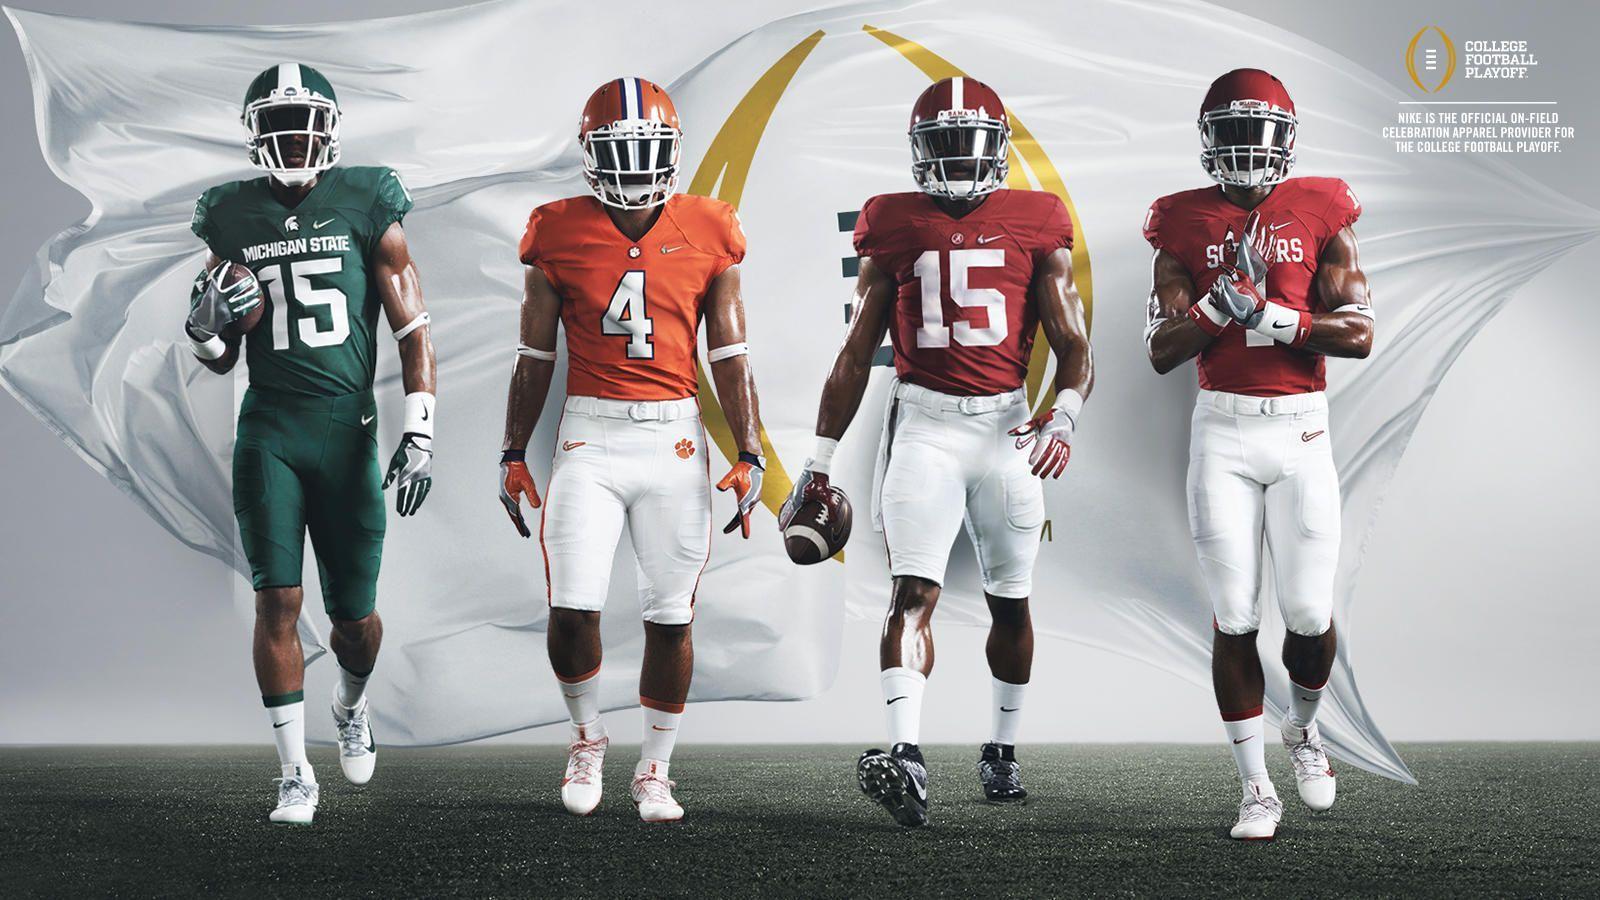 Get first look at uniforms for Alabama, 3 other teams in College